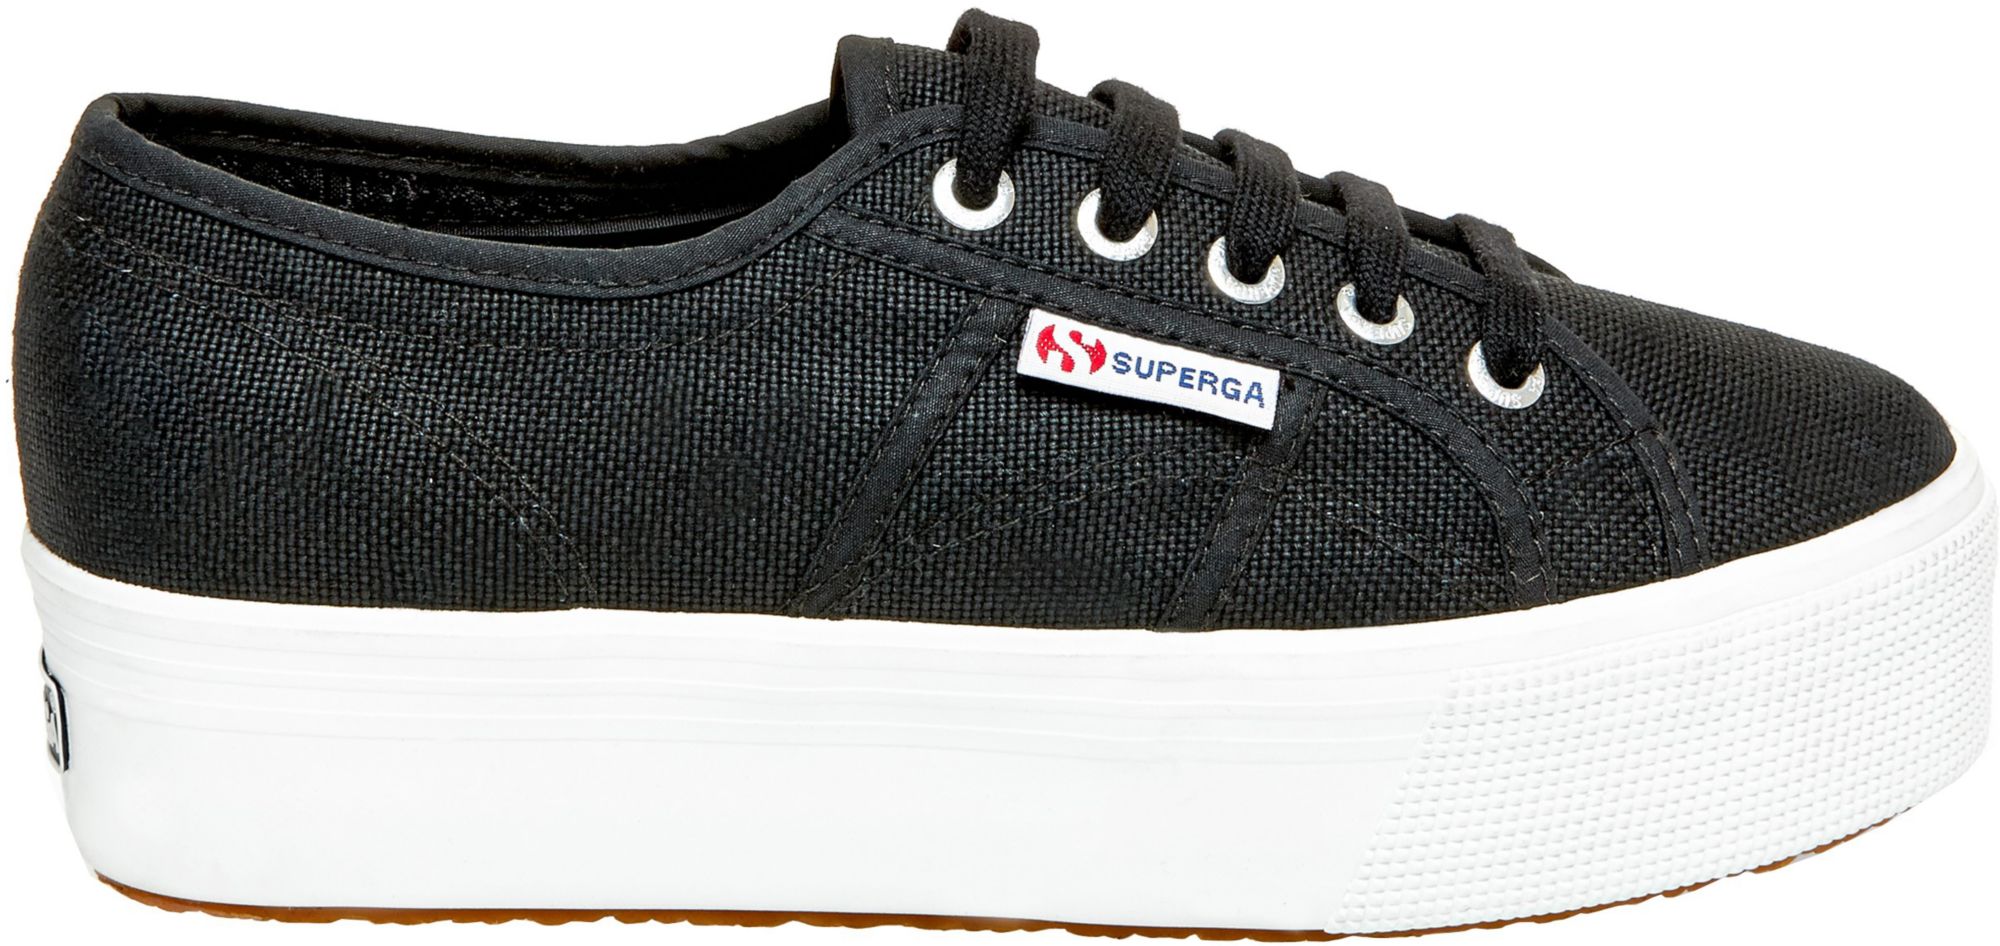 where can i buy supergas near me